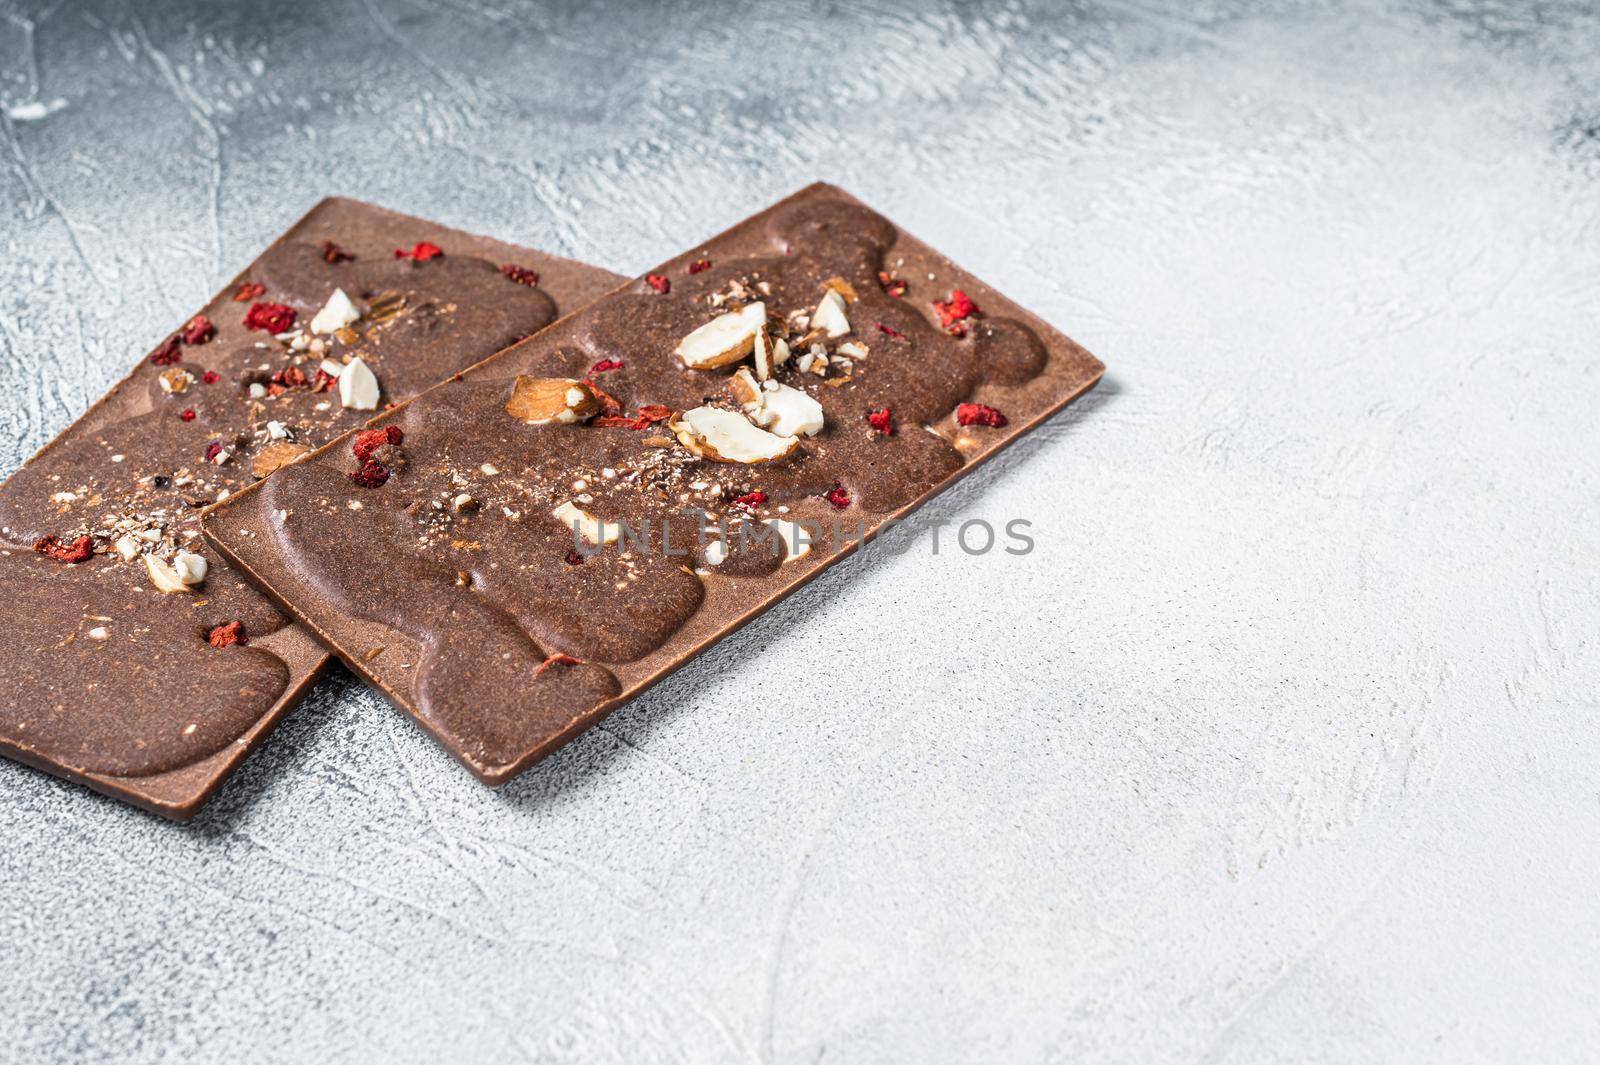 Craft homemade chocolate bars on kitchen table. White background. Top view. Copy space.